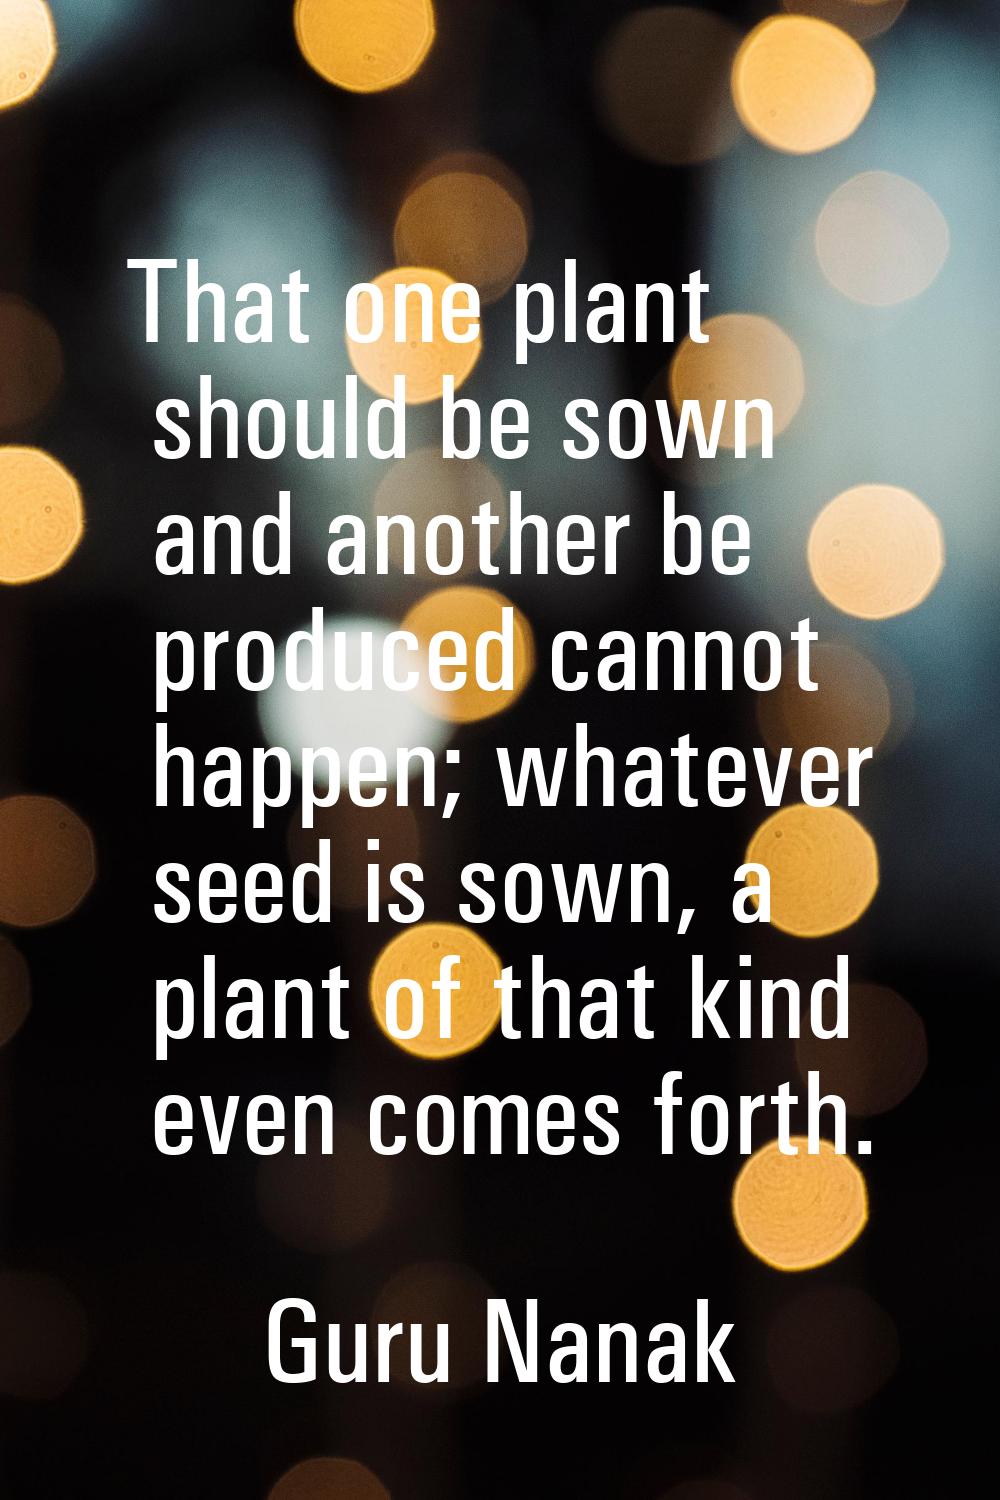 That one plant should be sown and another be produced cannot happen; whatever seed is sown, a plant